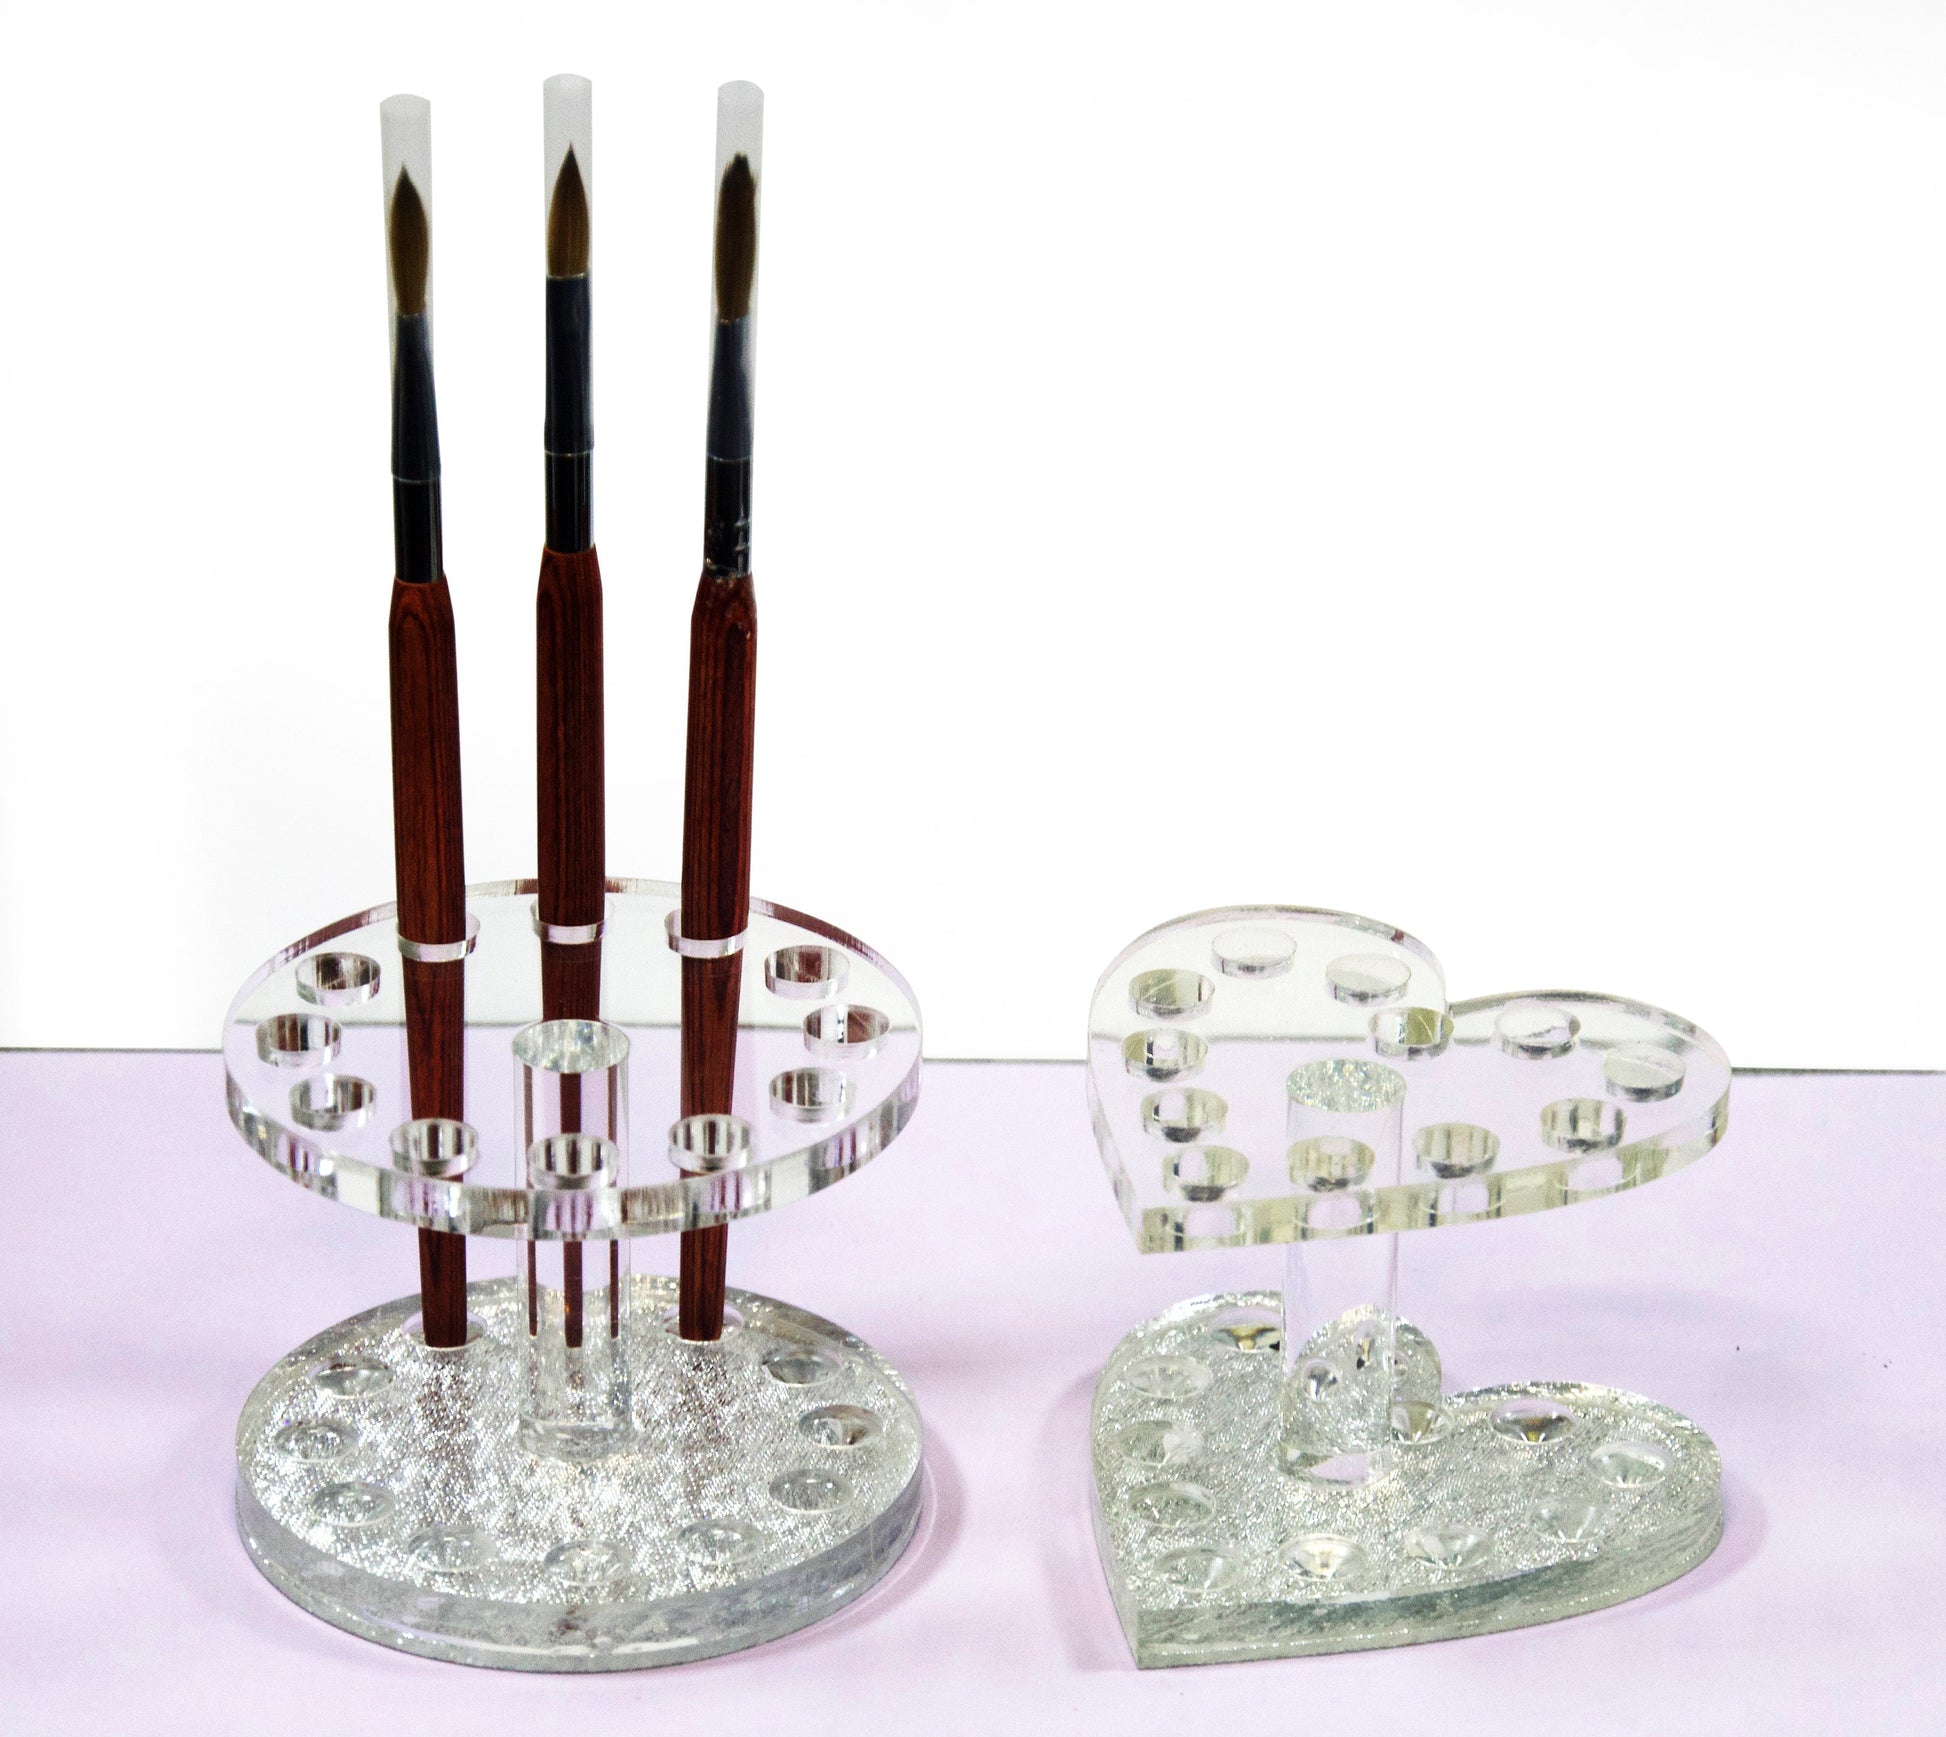 12 Holes Acrylic Gel Brush Pen Holder Heart Silver Rest Stand Display/ Nail Art Pens holder Carrier/ Round Organizer Stand Rack